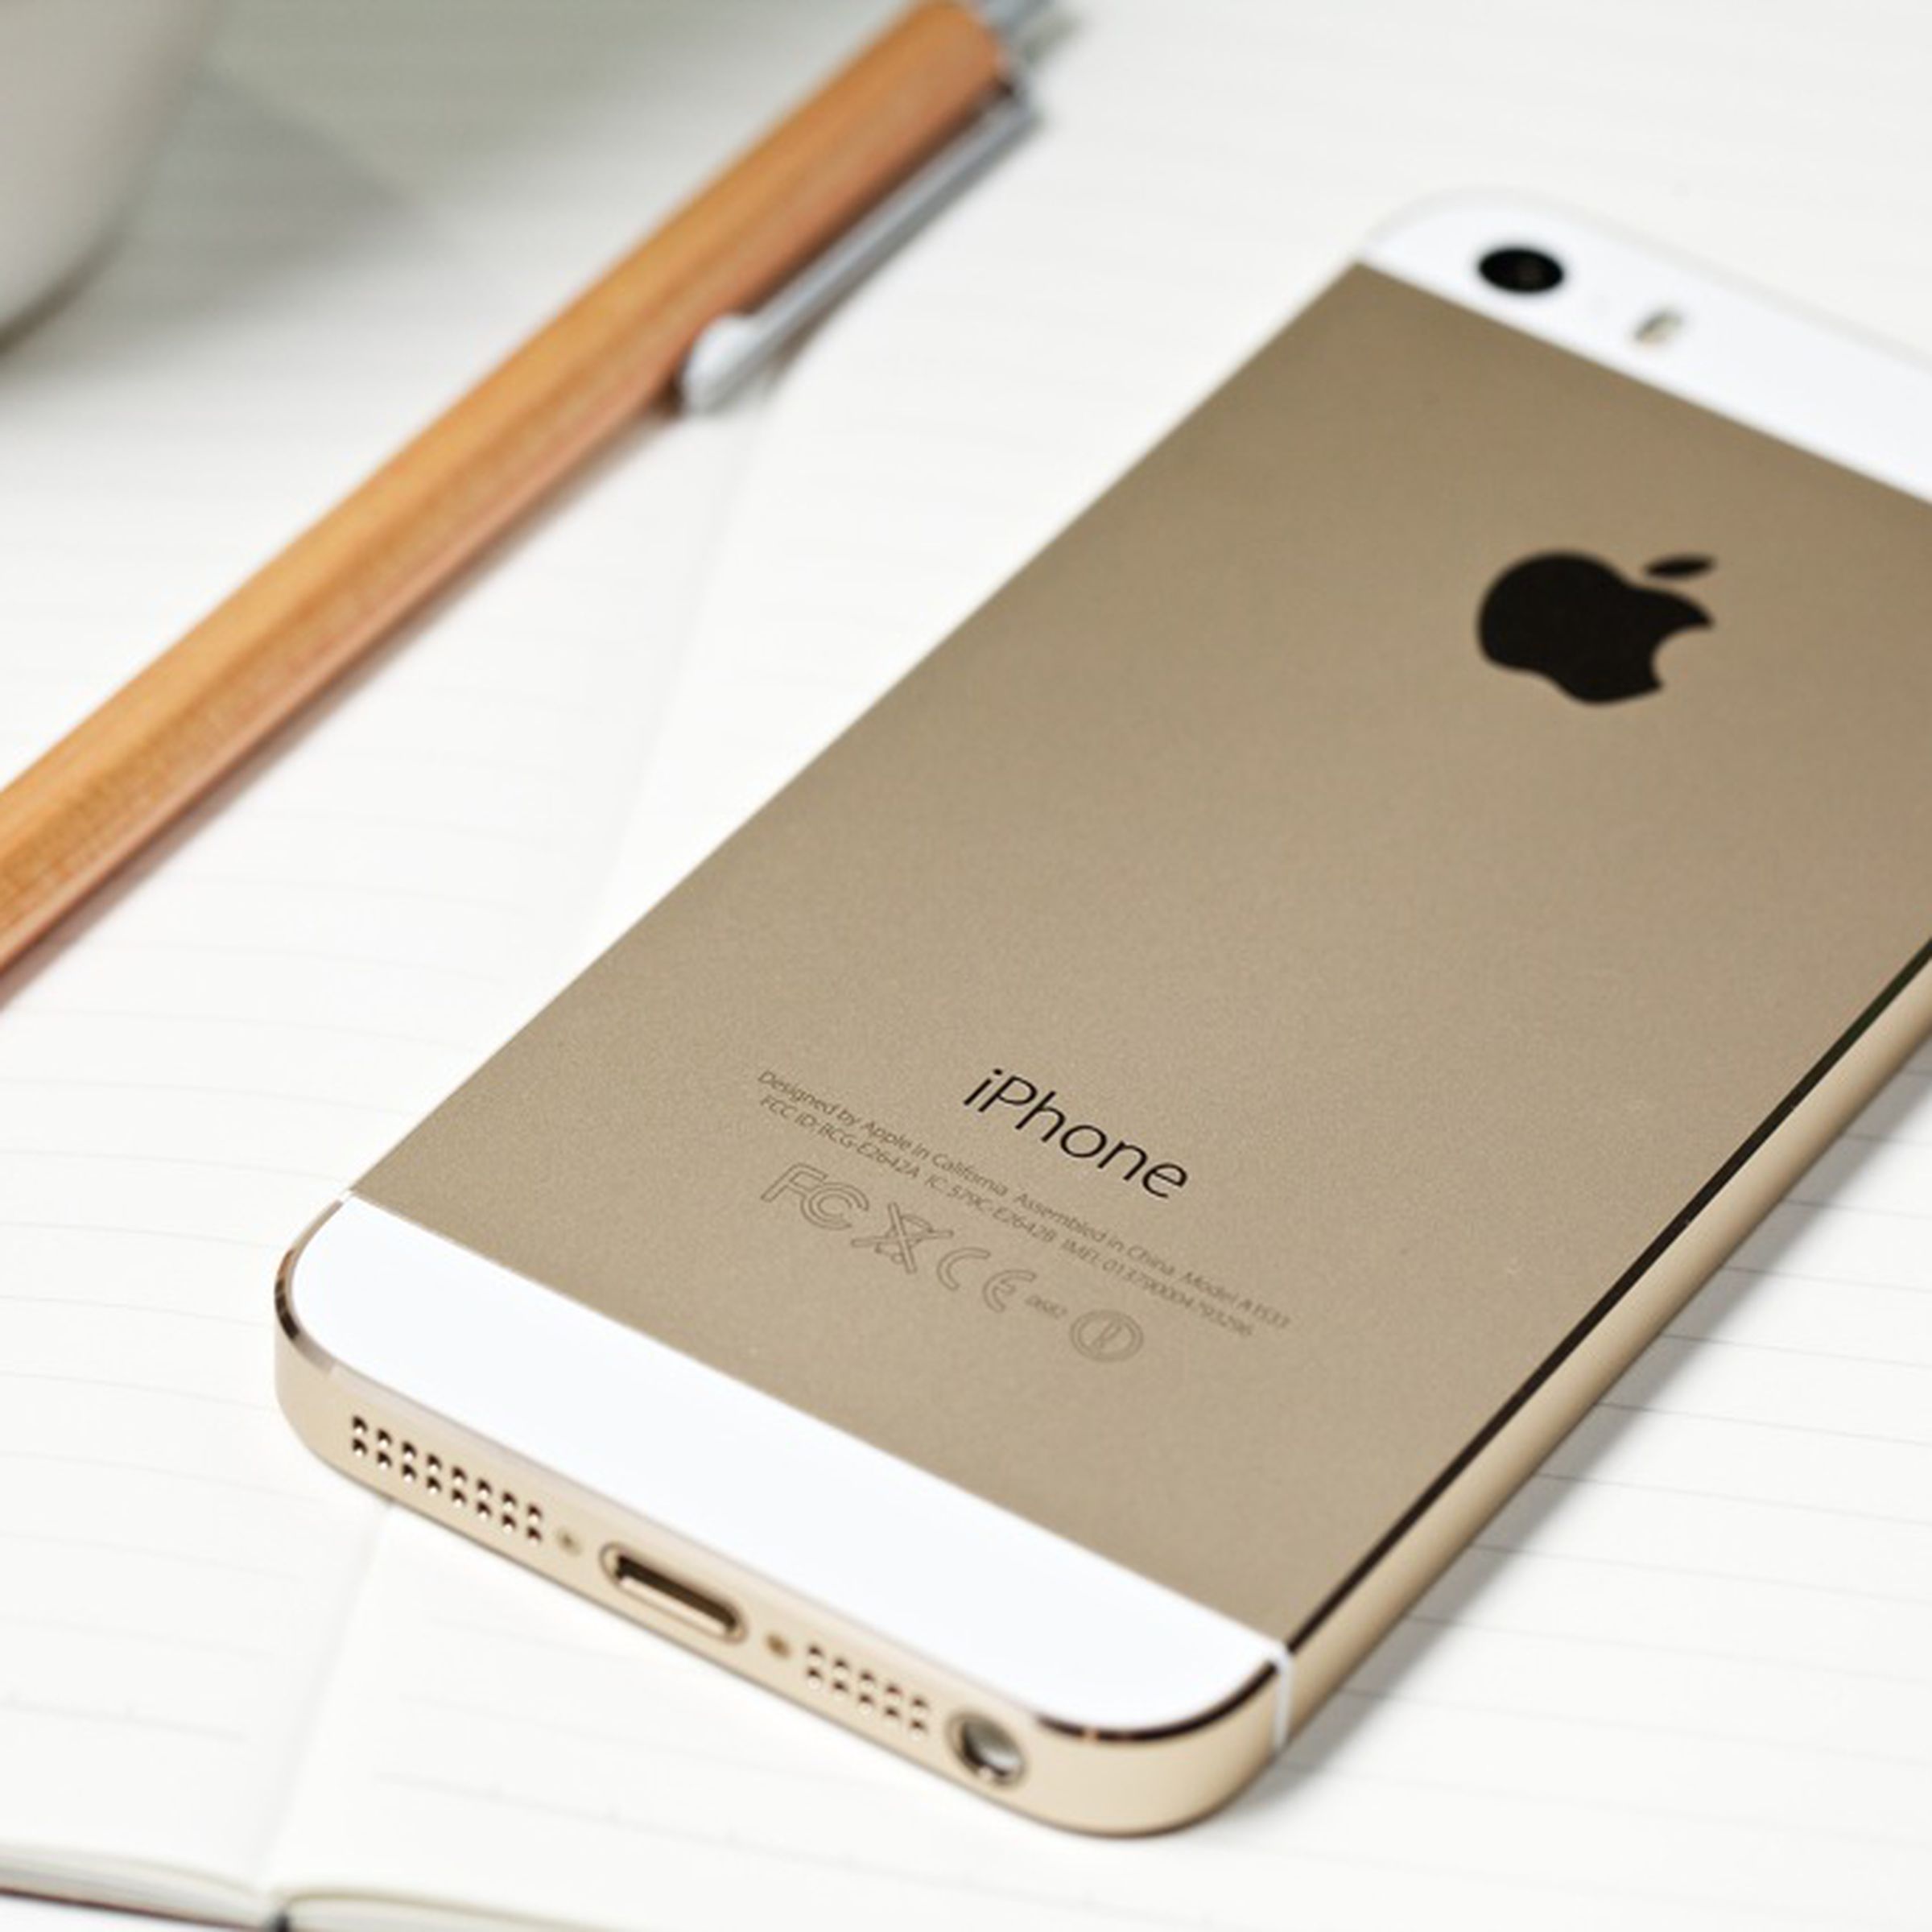 Image of a gold iPhone 5s laying on a table.